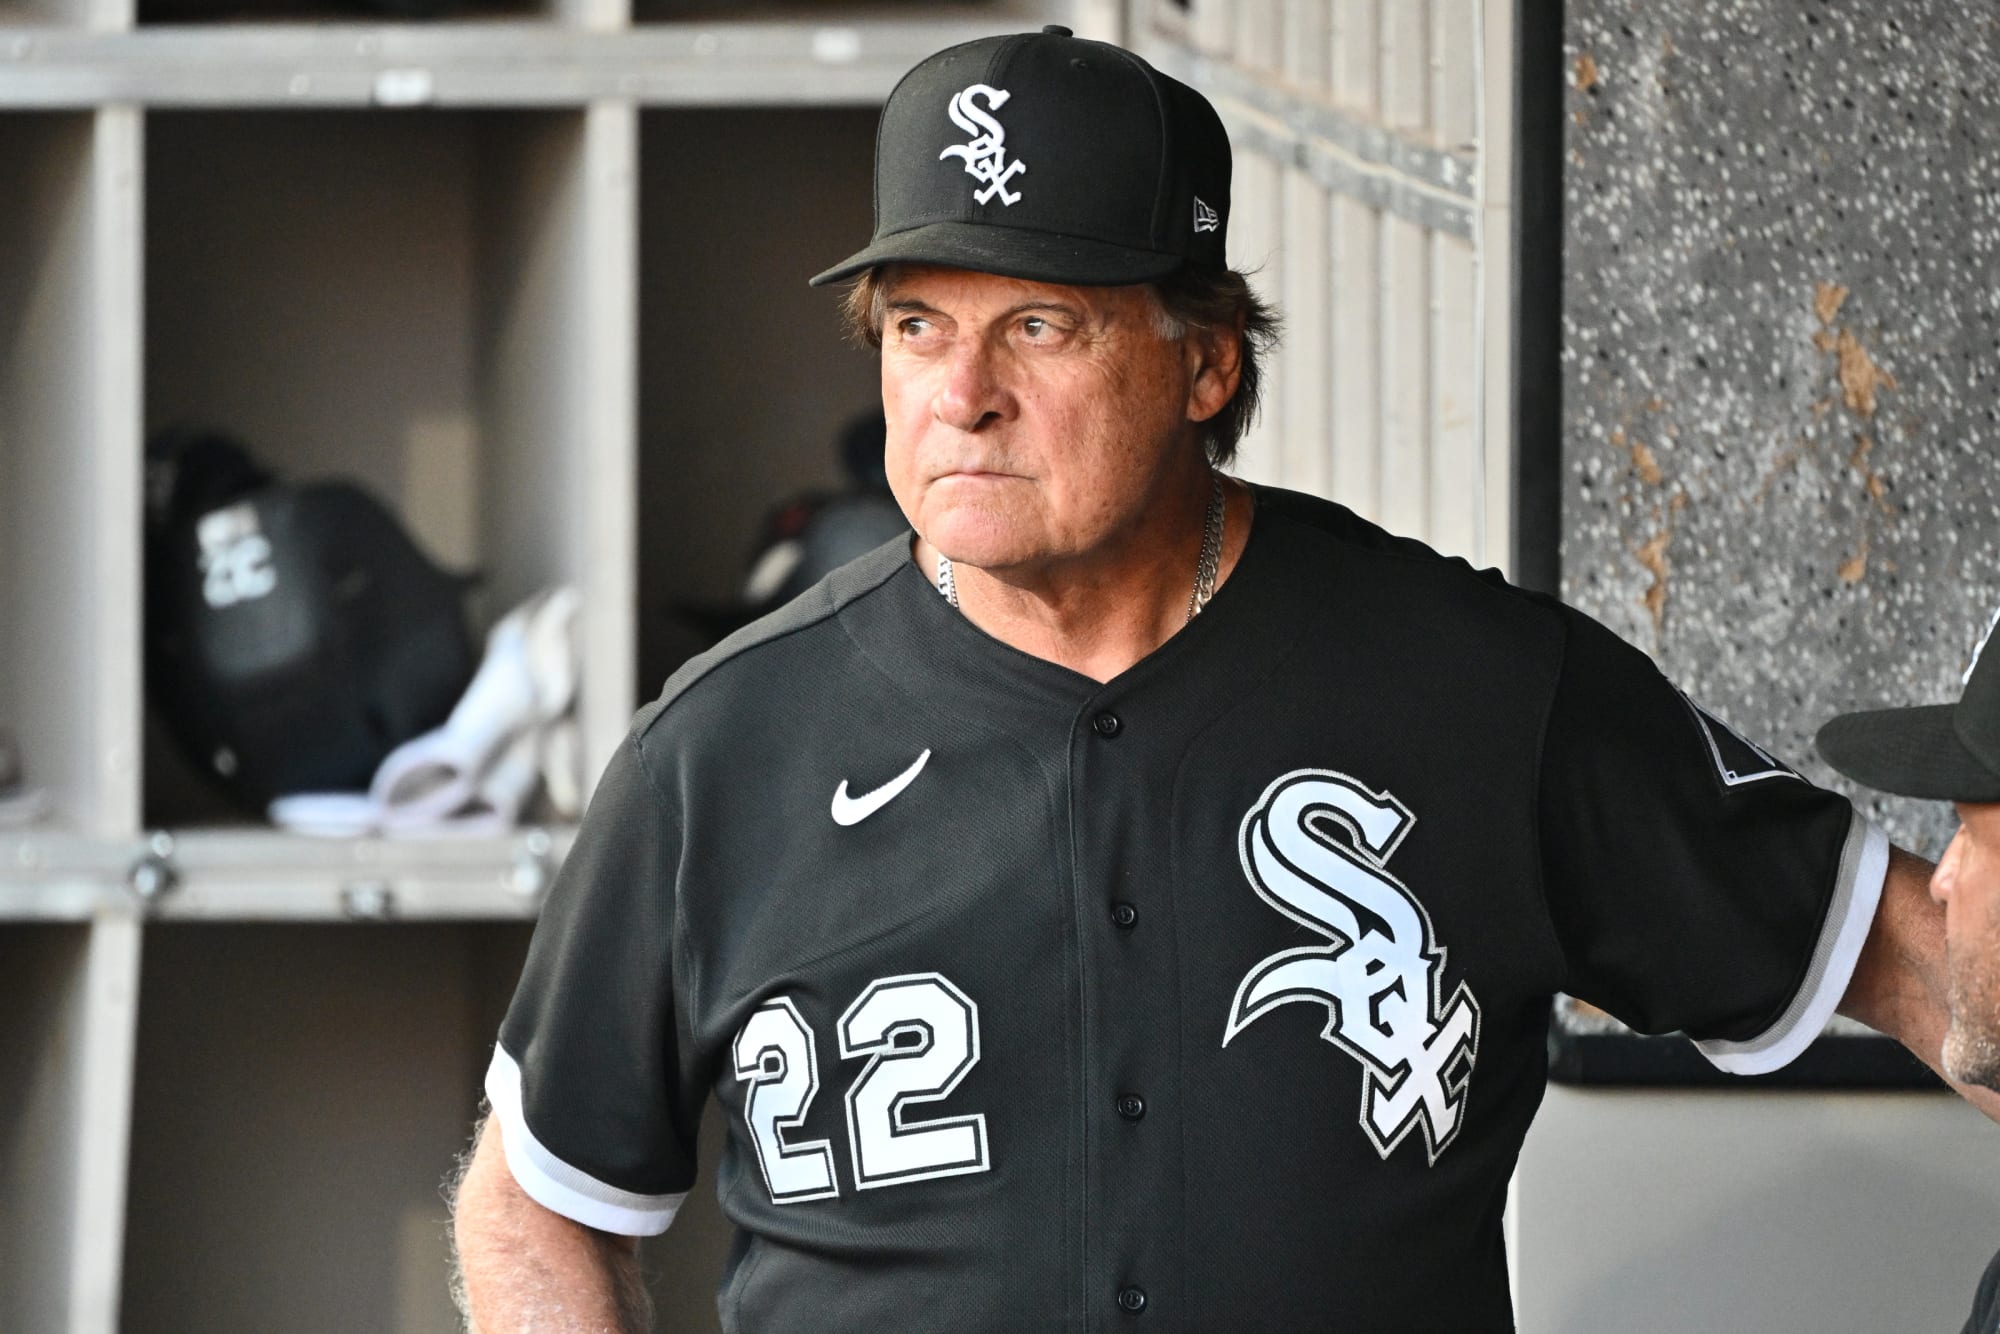 Cueto helps White Sox beat Twins after La Russa steps down – KGET 17